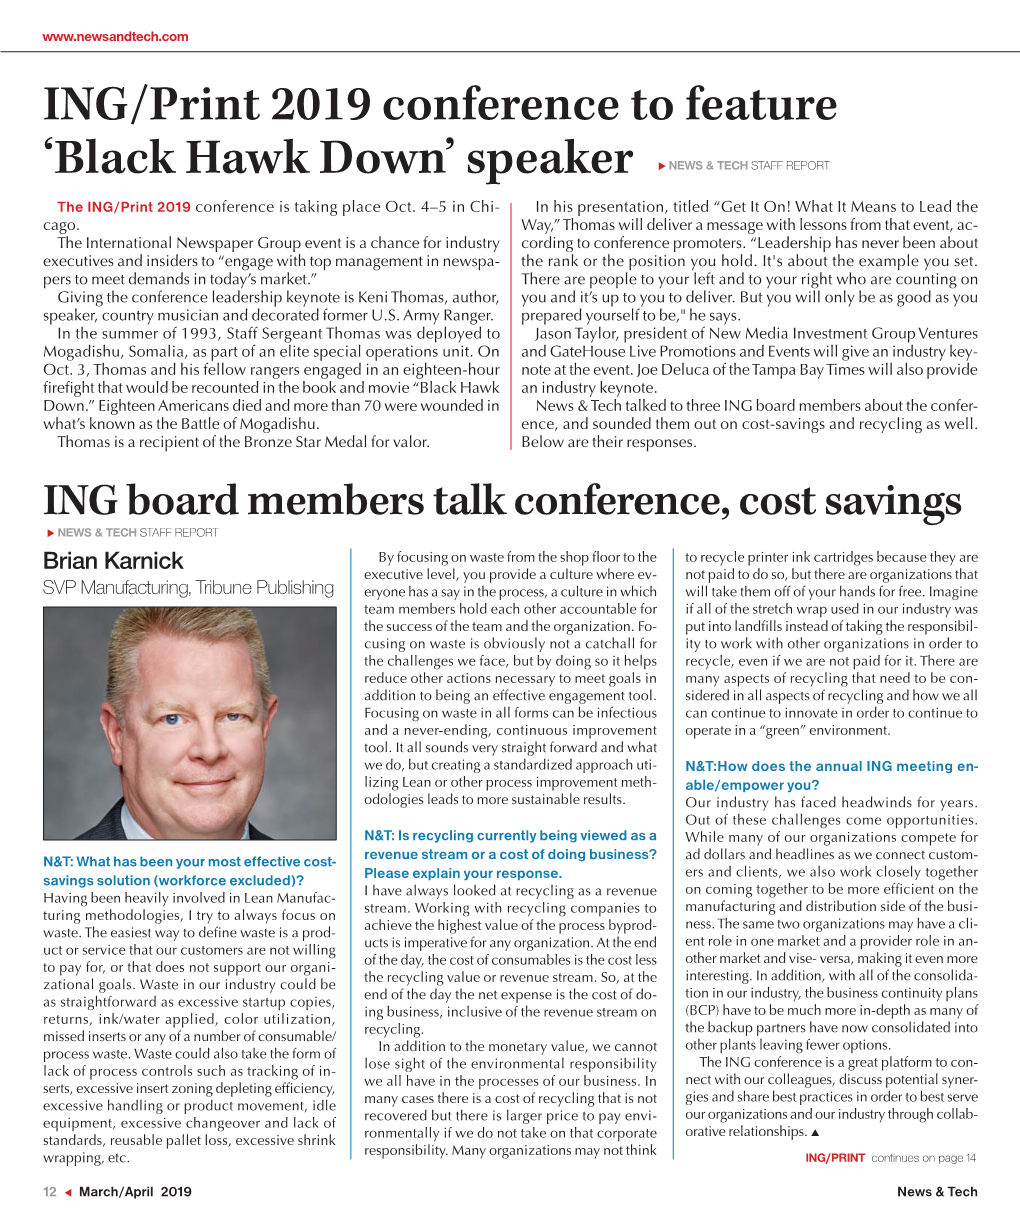 Black Hawk Down’ Speaker U News & Tech Staff Report the ING/Print 2019 Conference Is Taking Place Oct